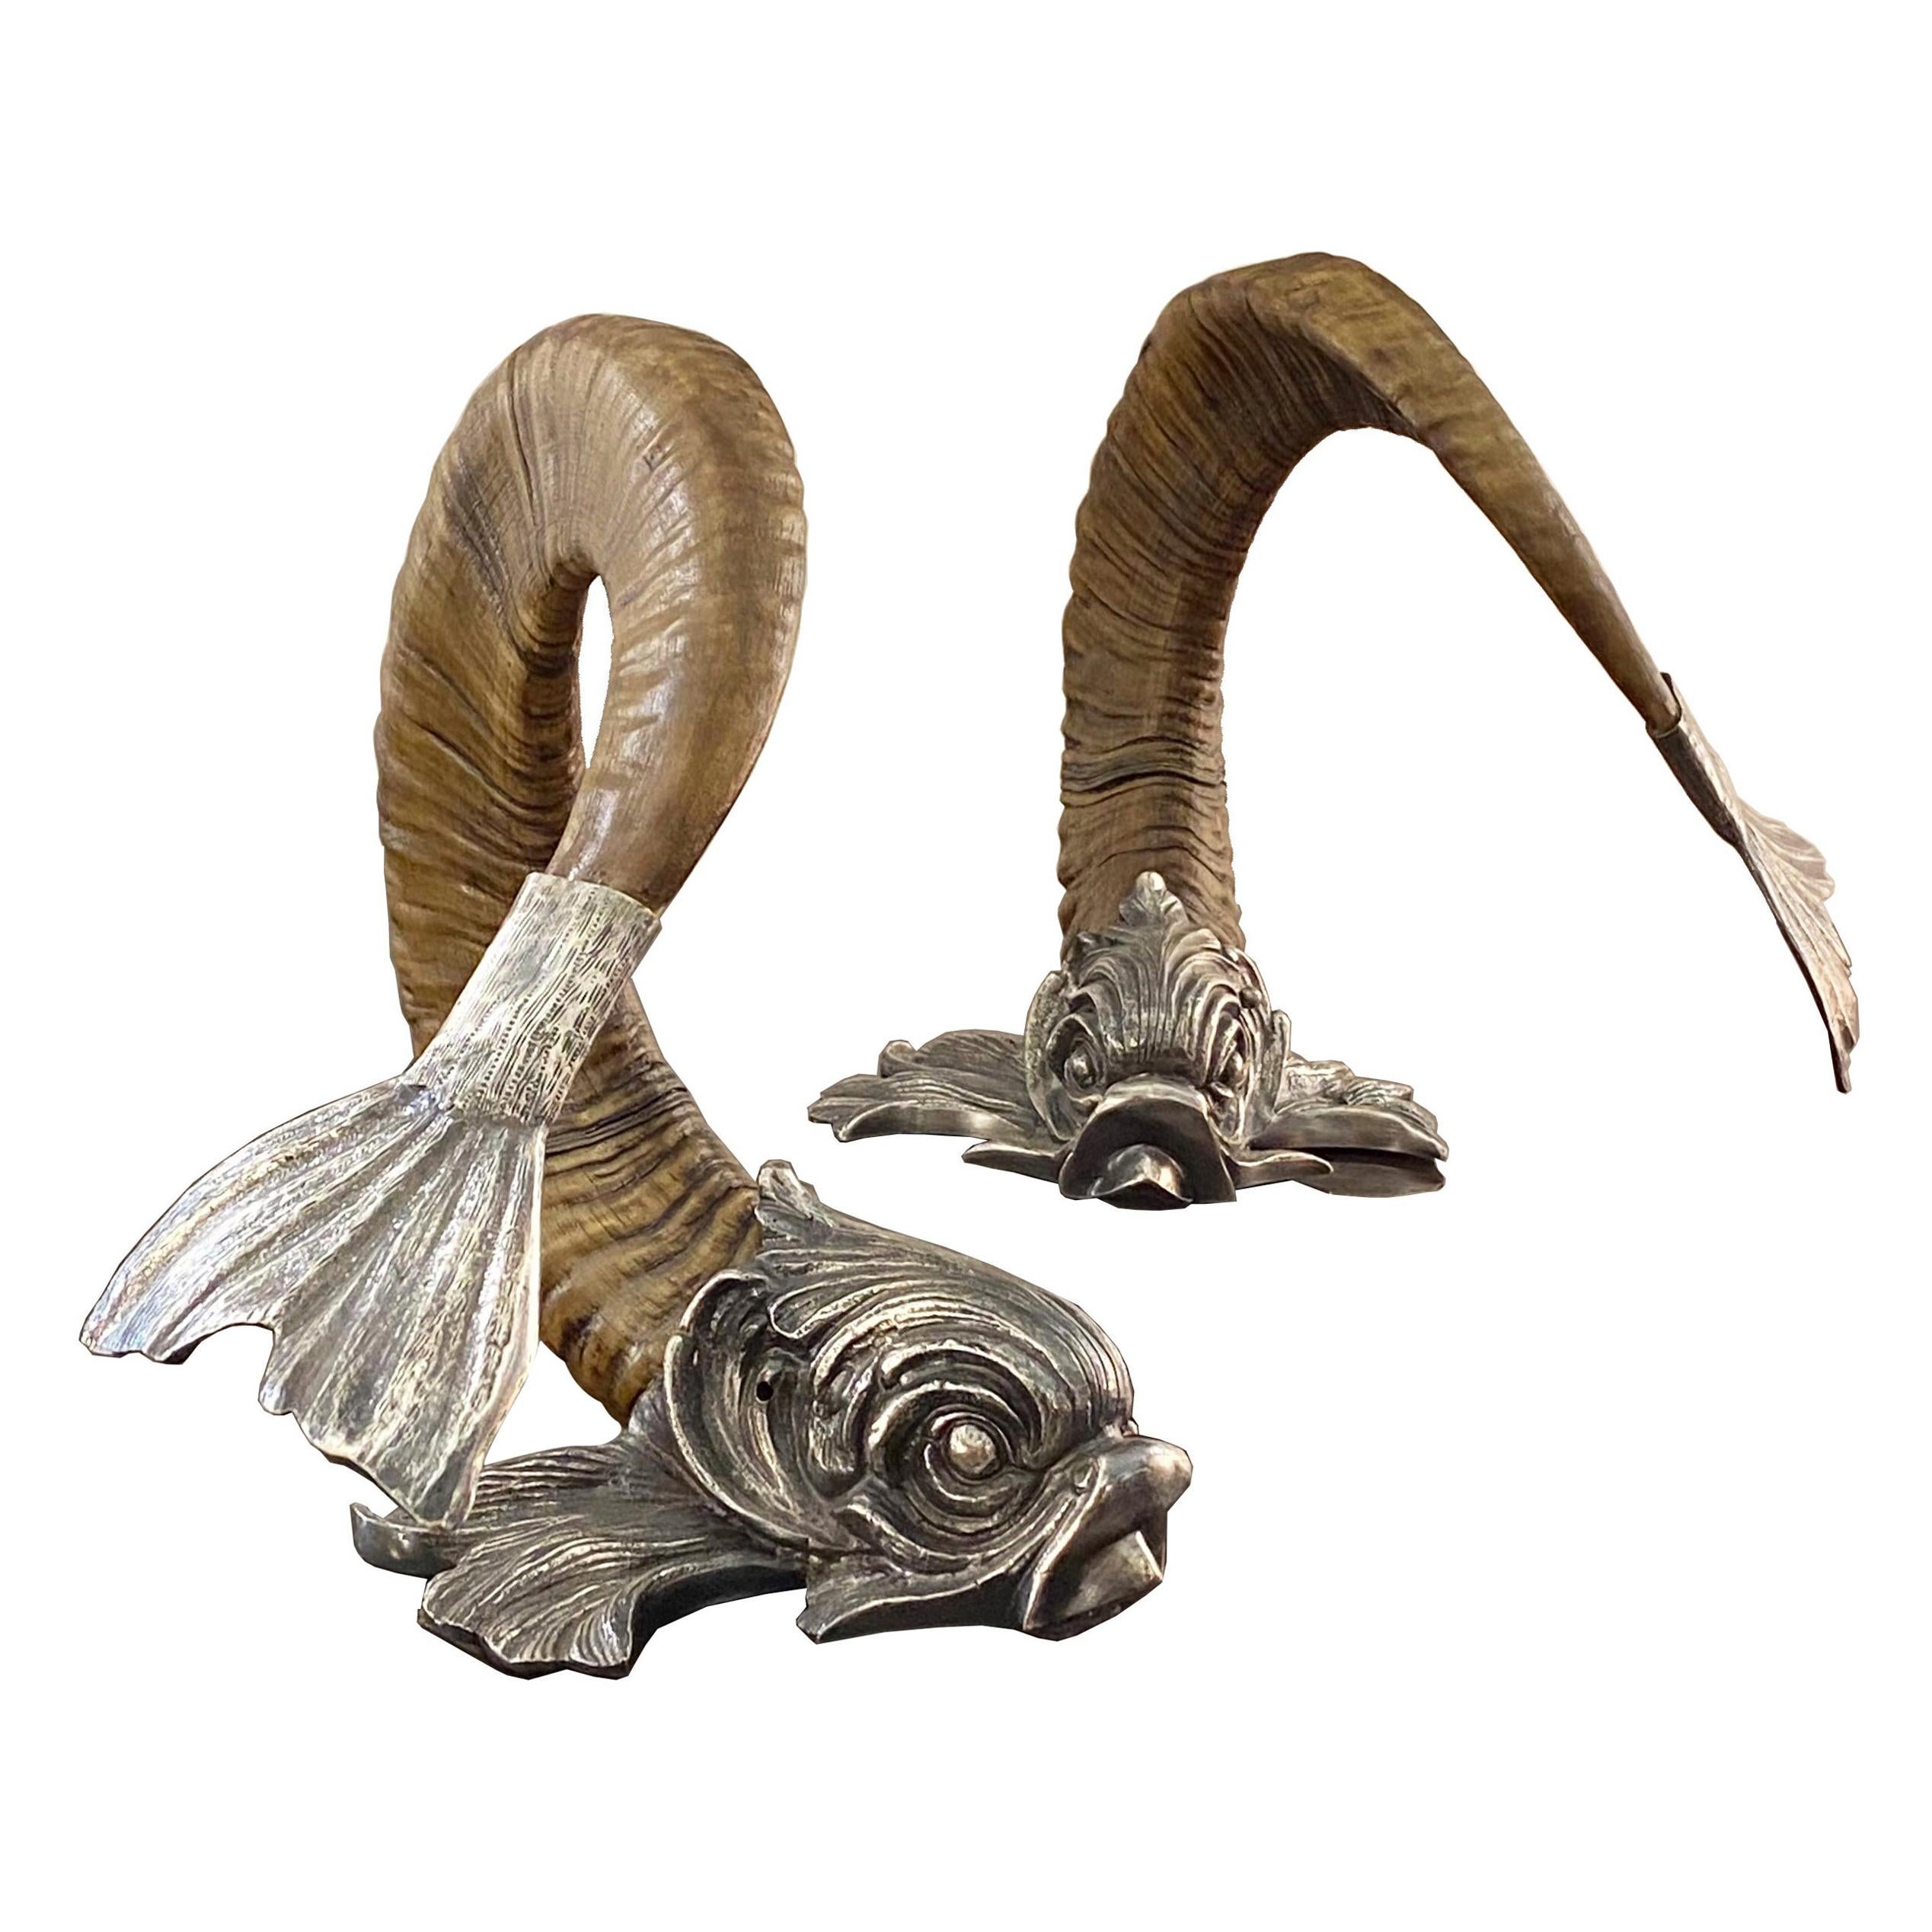 Gabriella Crespi Pair of Silver and Horn Dolphins